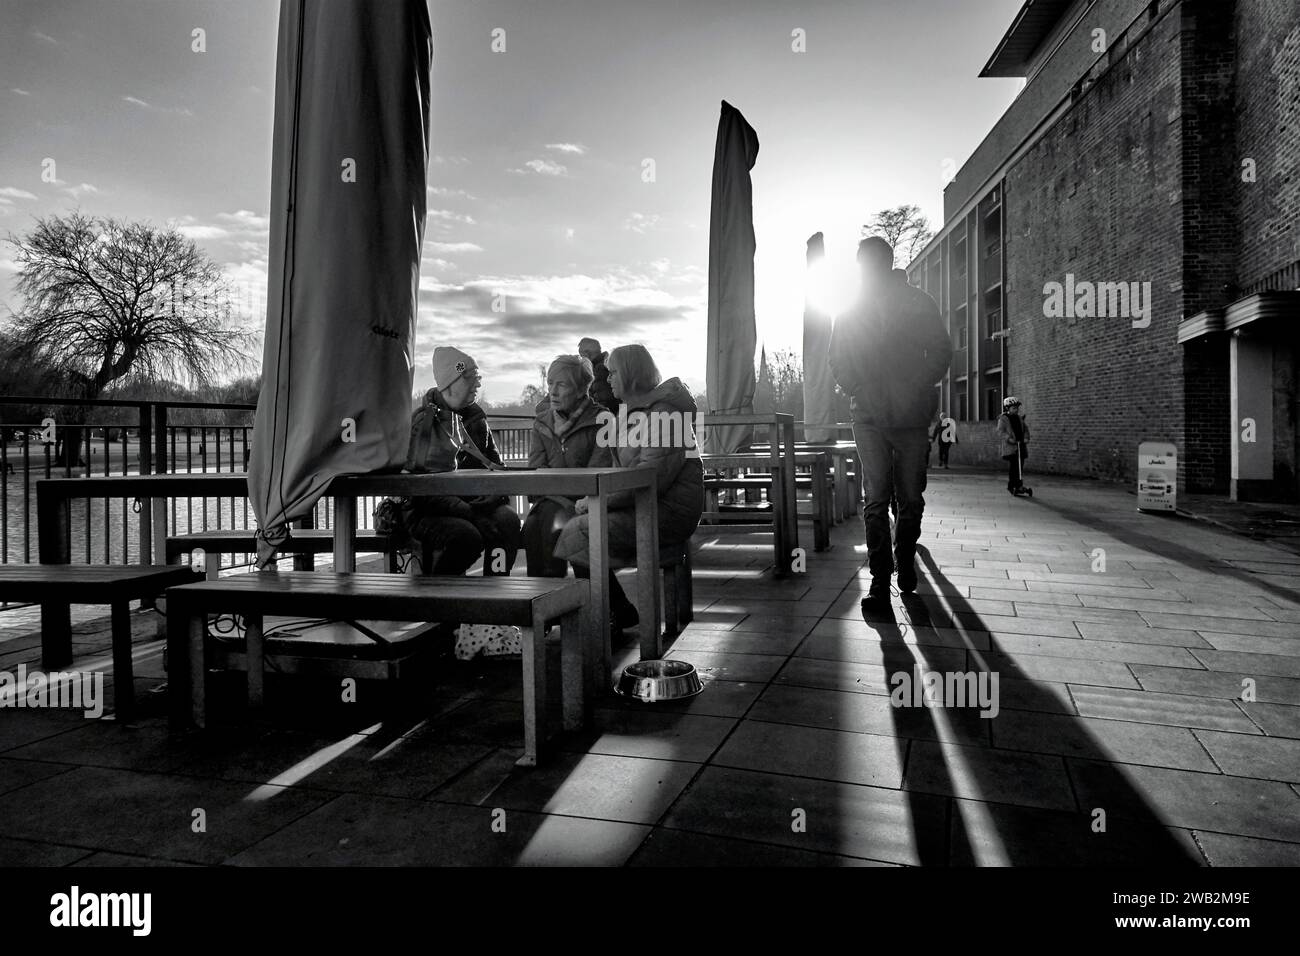 People enjoying the winter sun at Stratford upon Avon, England, UK. Contre Jour, black and white photography, Stock Photo